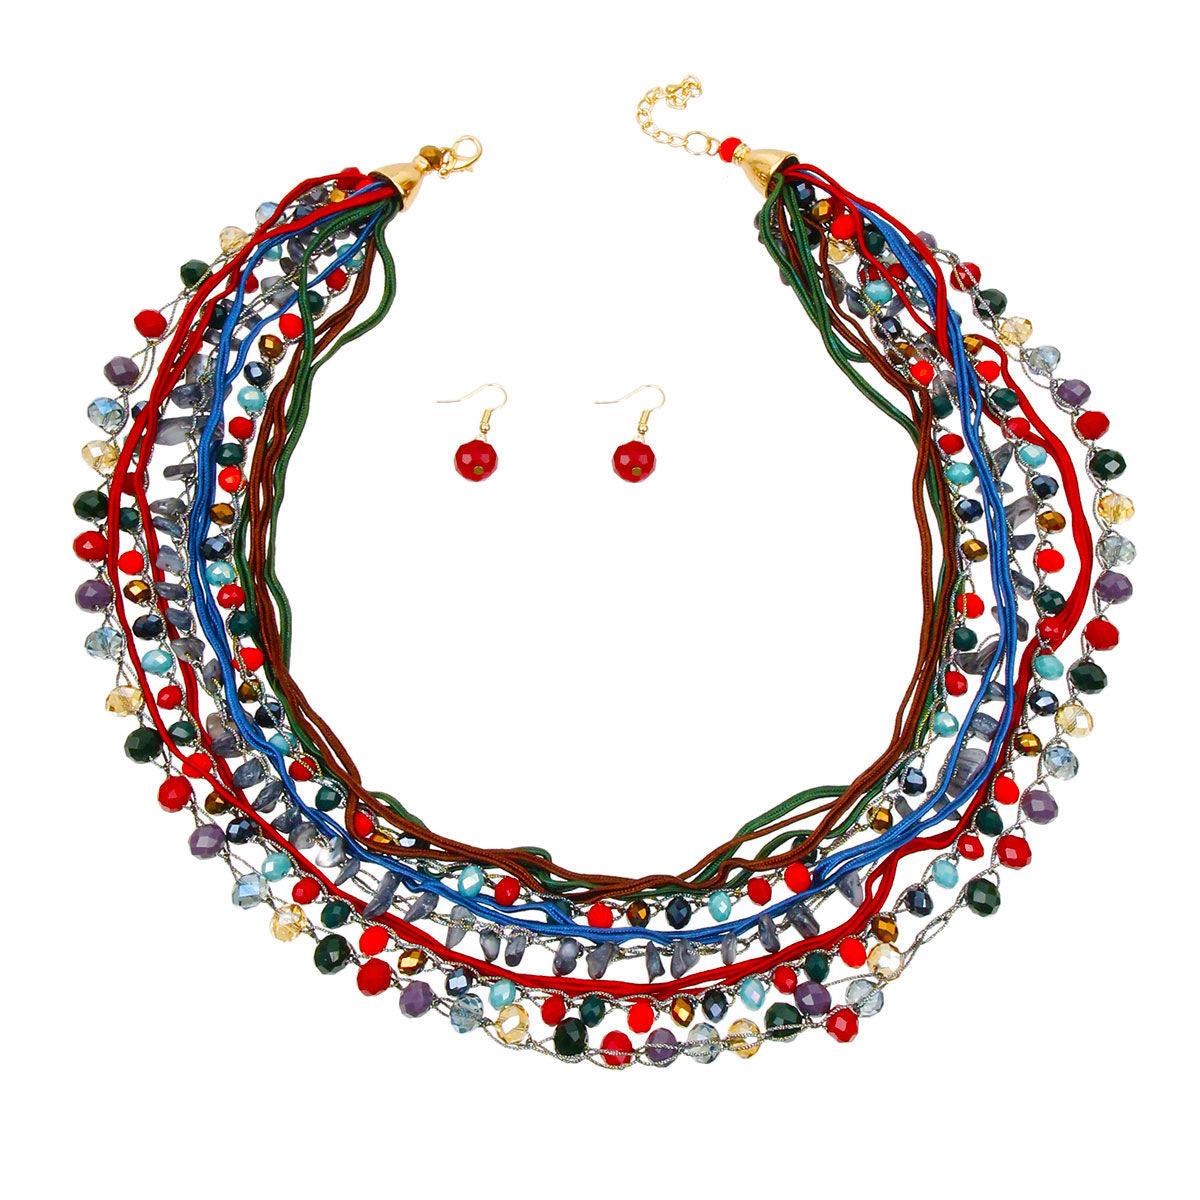 Multistrand Layered Necklace Set with Multicolor Glass and Stone Beads on Cord